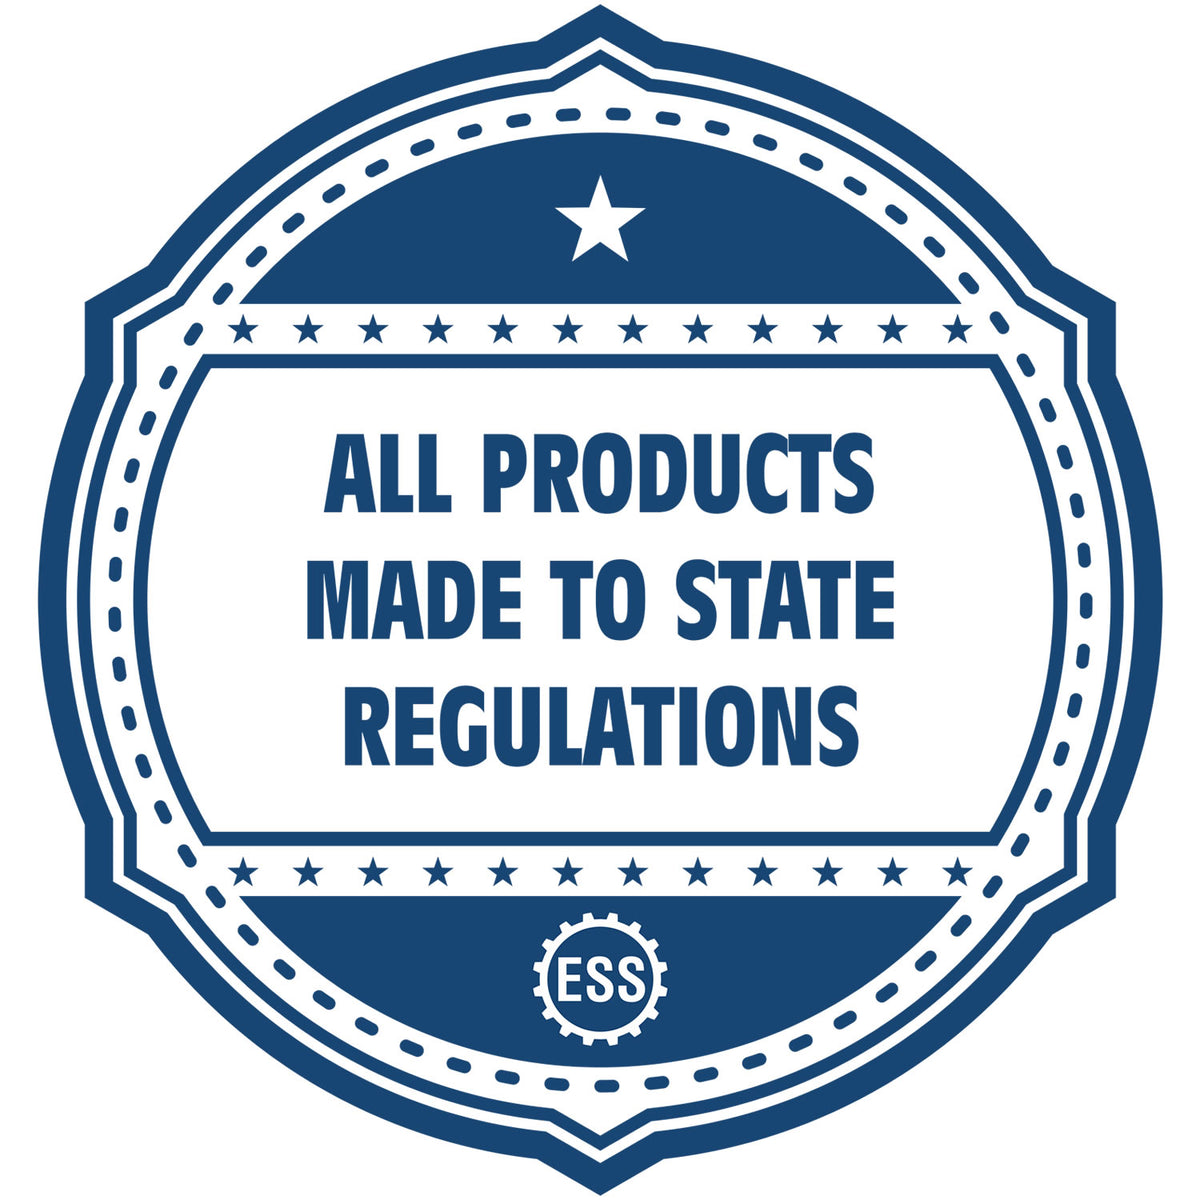 An icon or badge element for the Heavy Duty Cast Iron Mississippi Land Surveyor Seal Embosser showing that this product is made in compliance with state regulations.